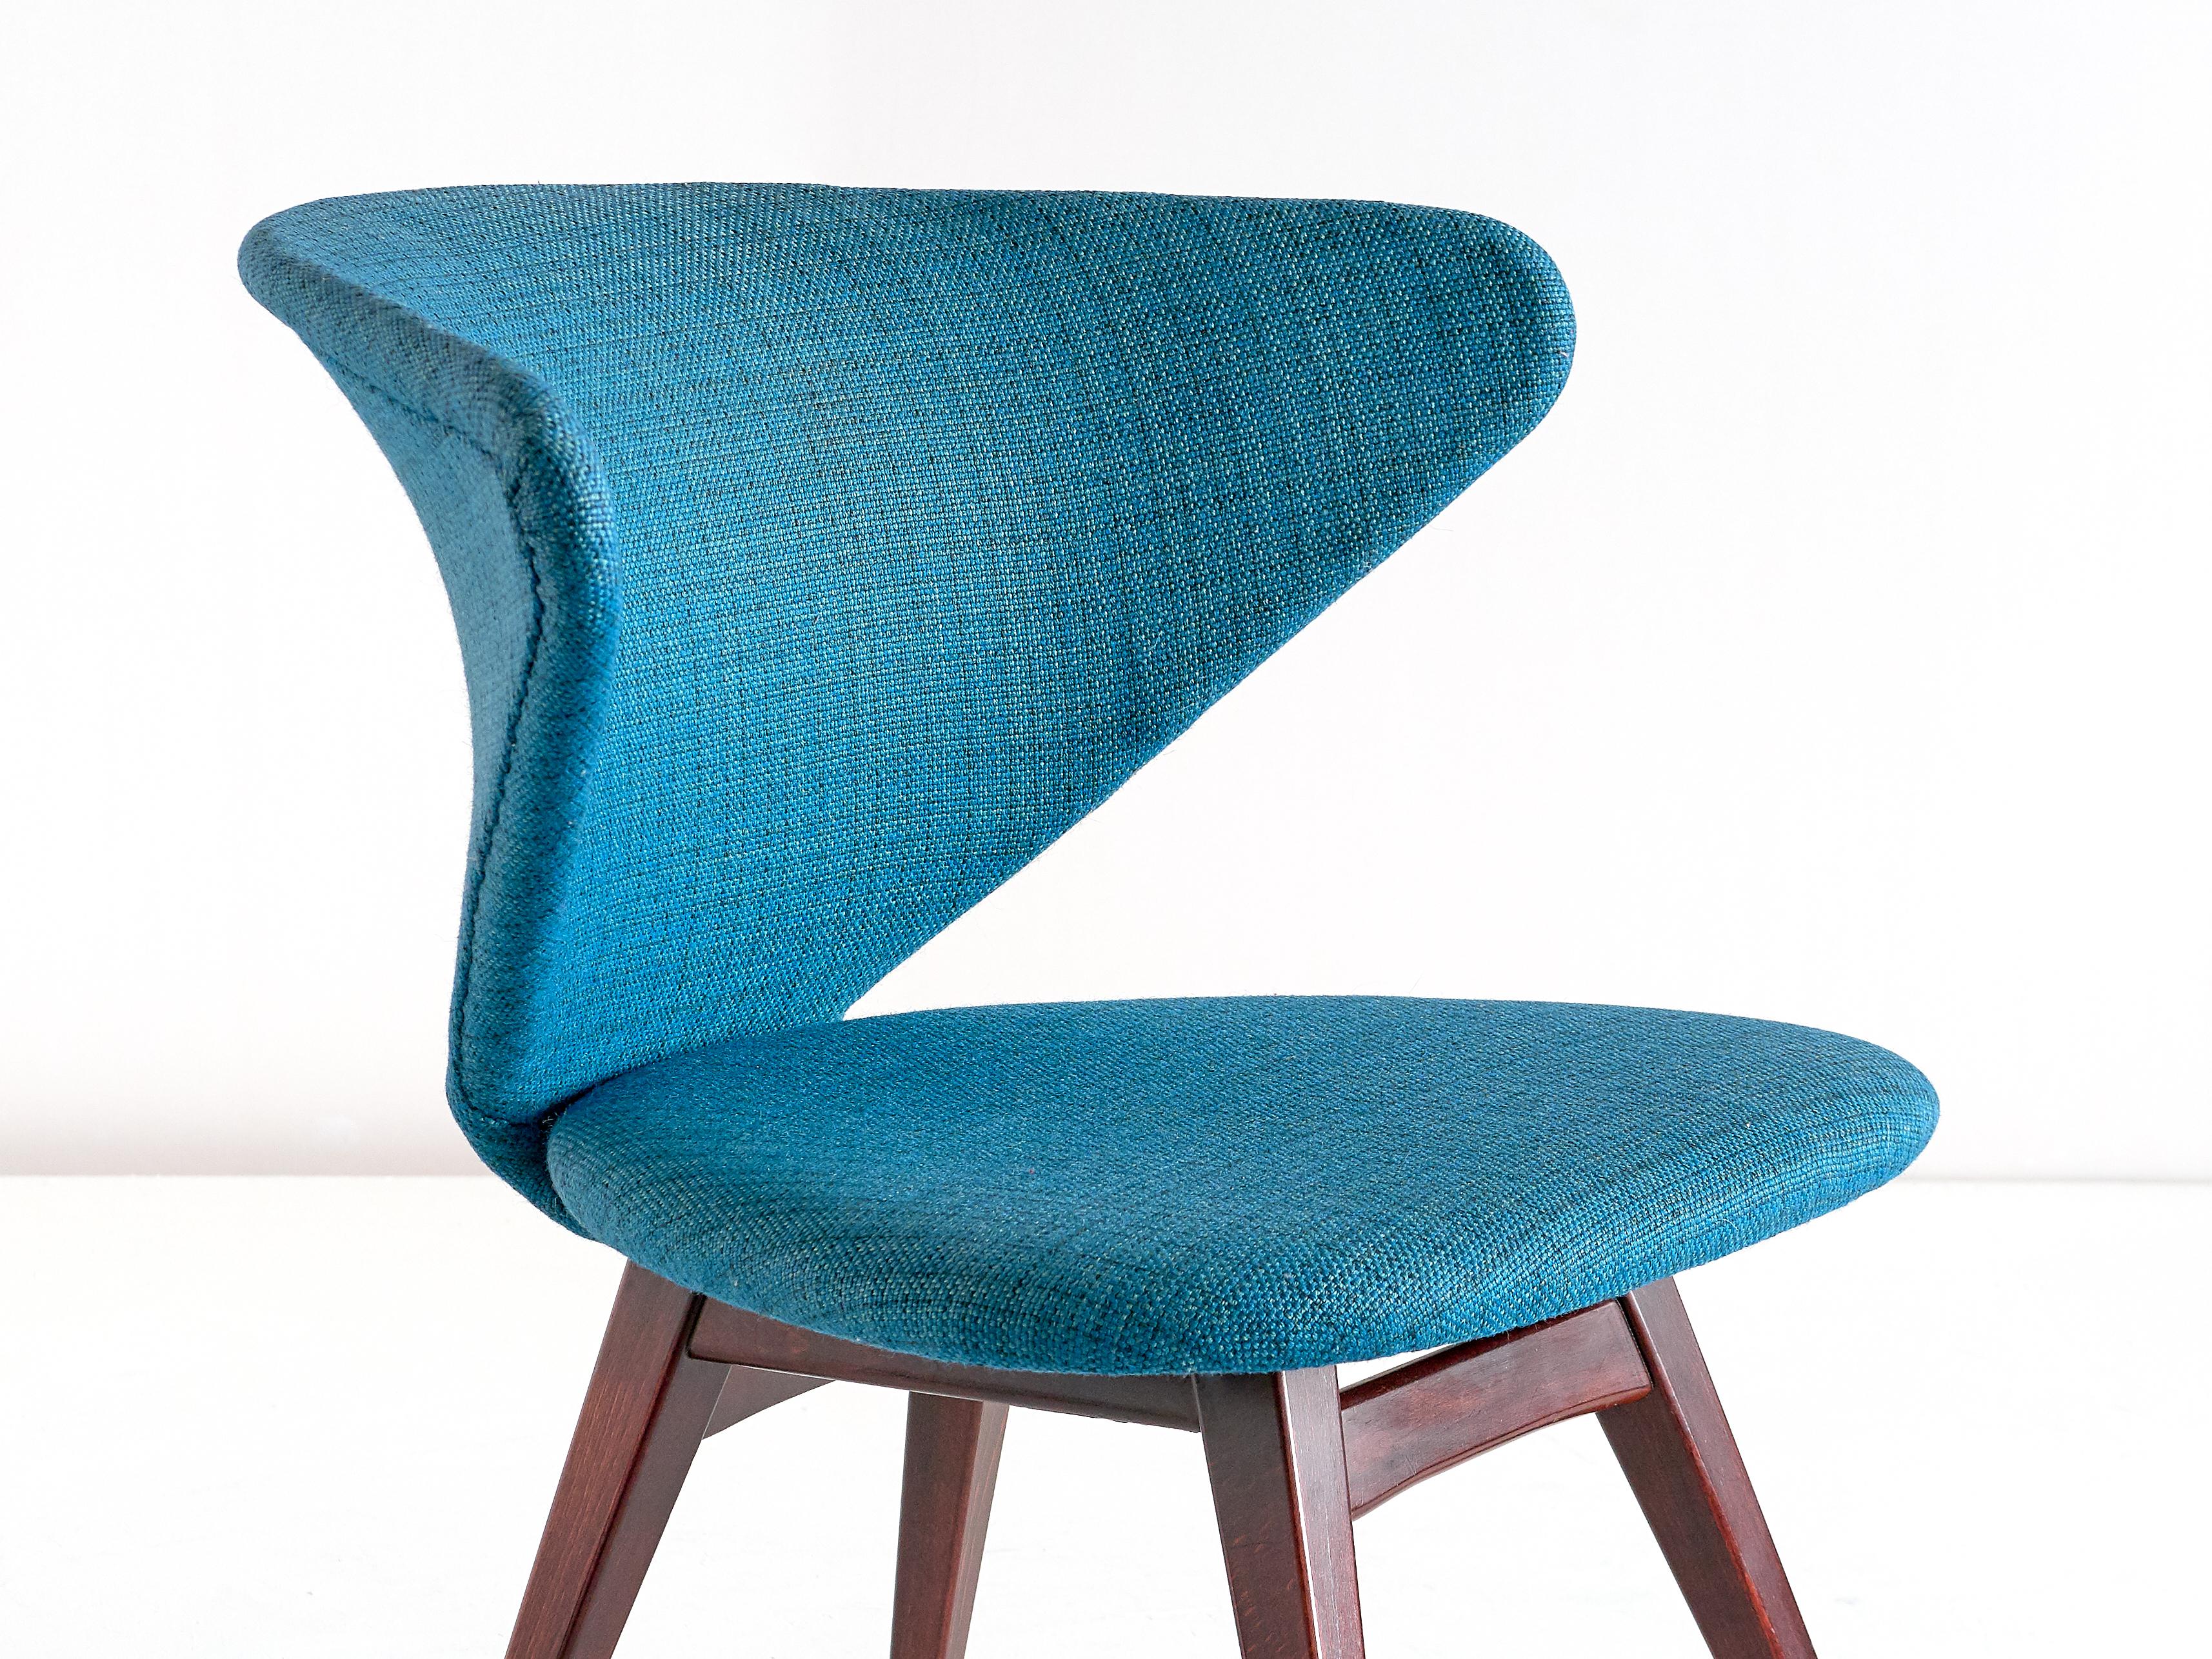 Mid-20th Century Sigfrid Ljungqvist Wing Shaped Chair, Petrol Blue Fabric and Beech, Sweden, 1958 For Sale